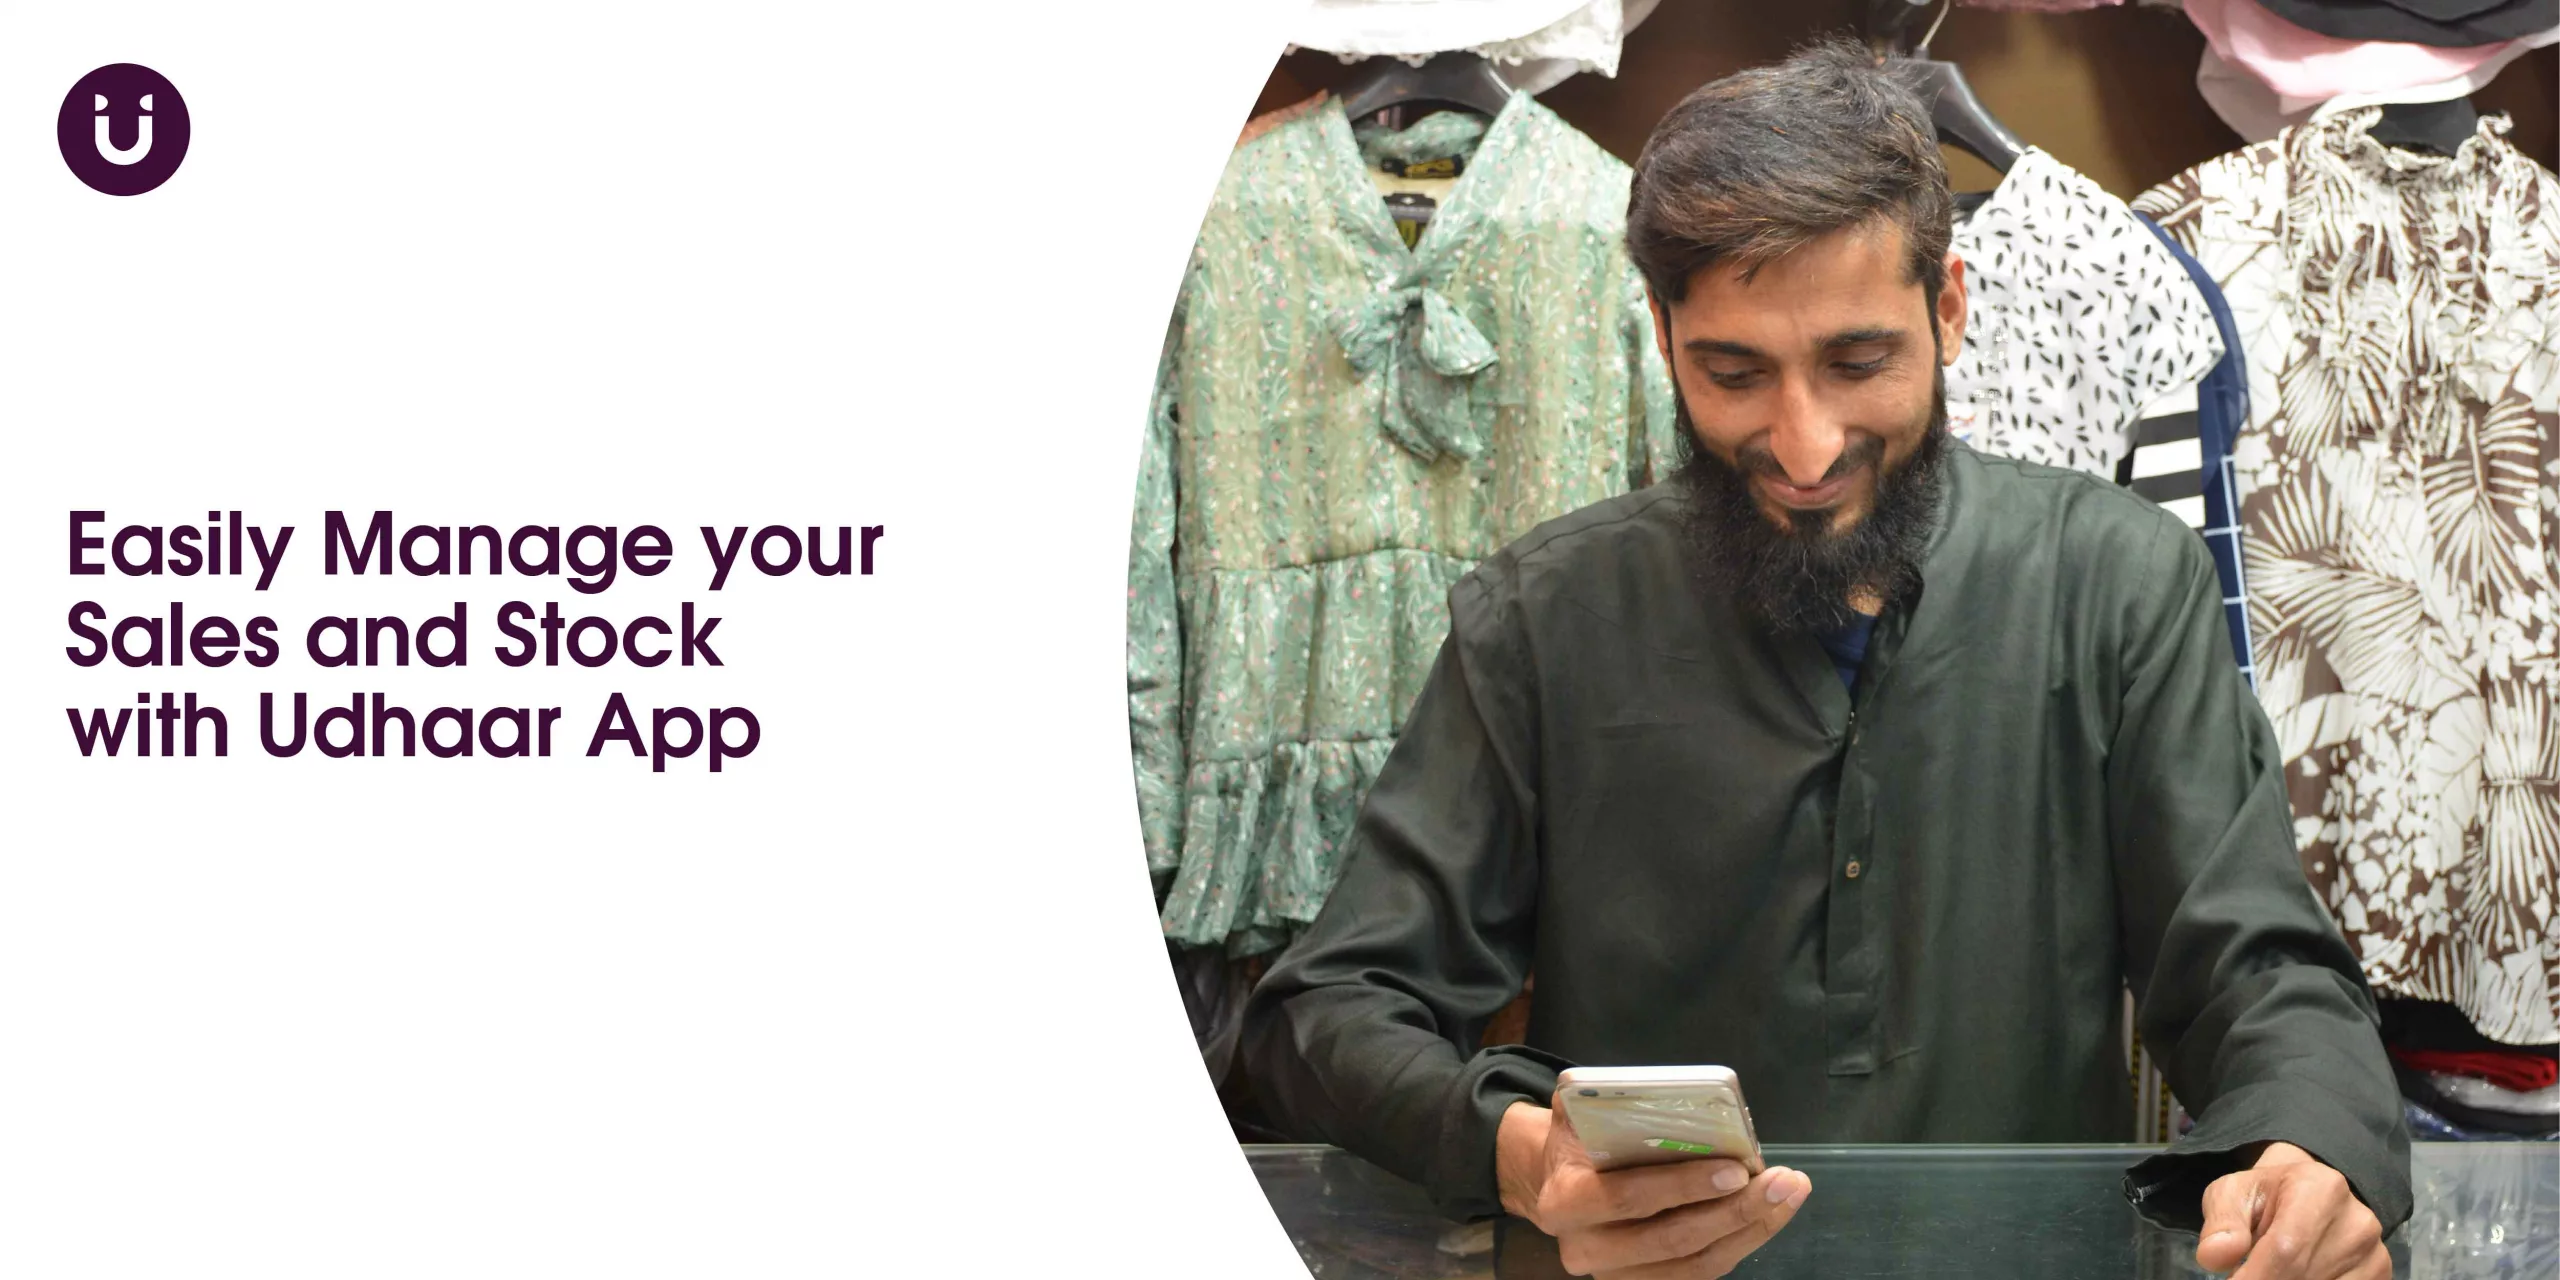 Track your Daily Sales and Save Time With Udhaar App